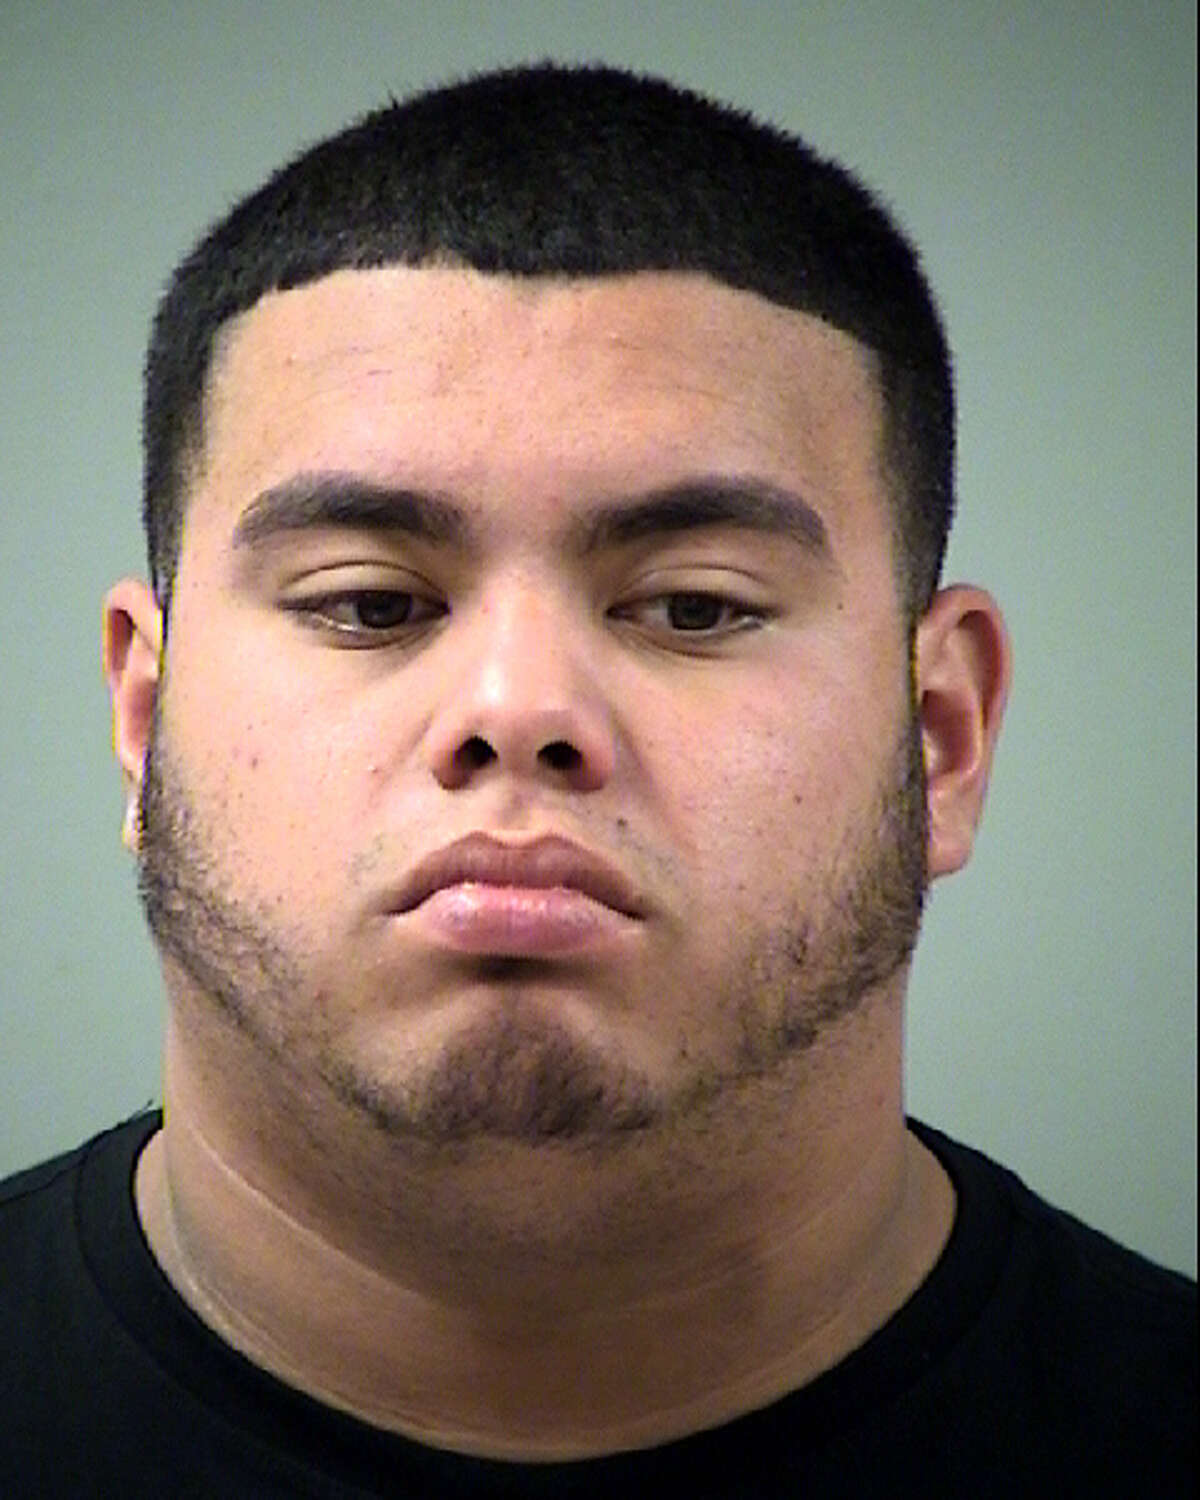 Joseph Gutierrez was arrested on a theft charge after he allegedly stole about $3,500 worth of electronics from a Wal-Mart.